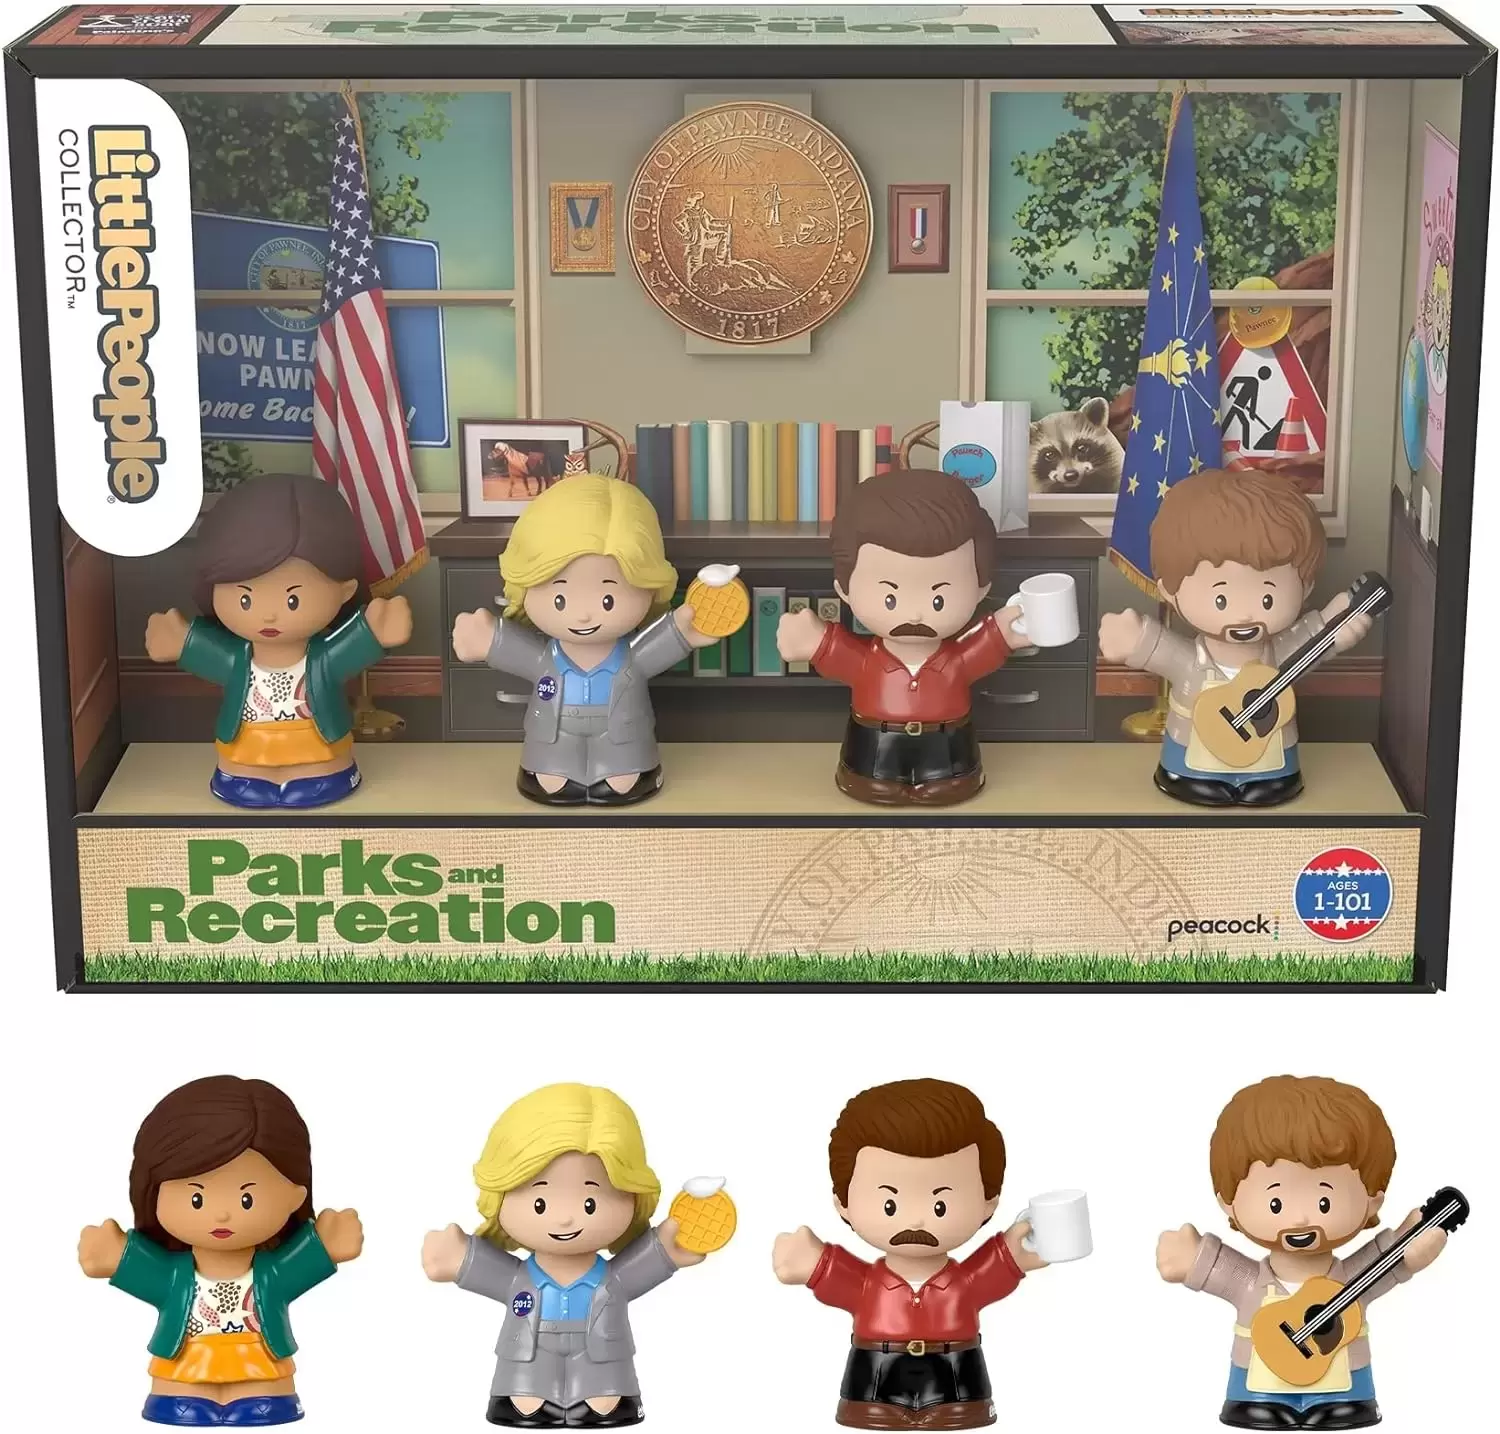 Little people - Parks and Recreation Collector Set